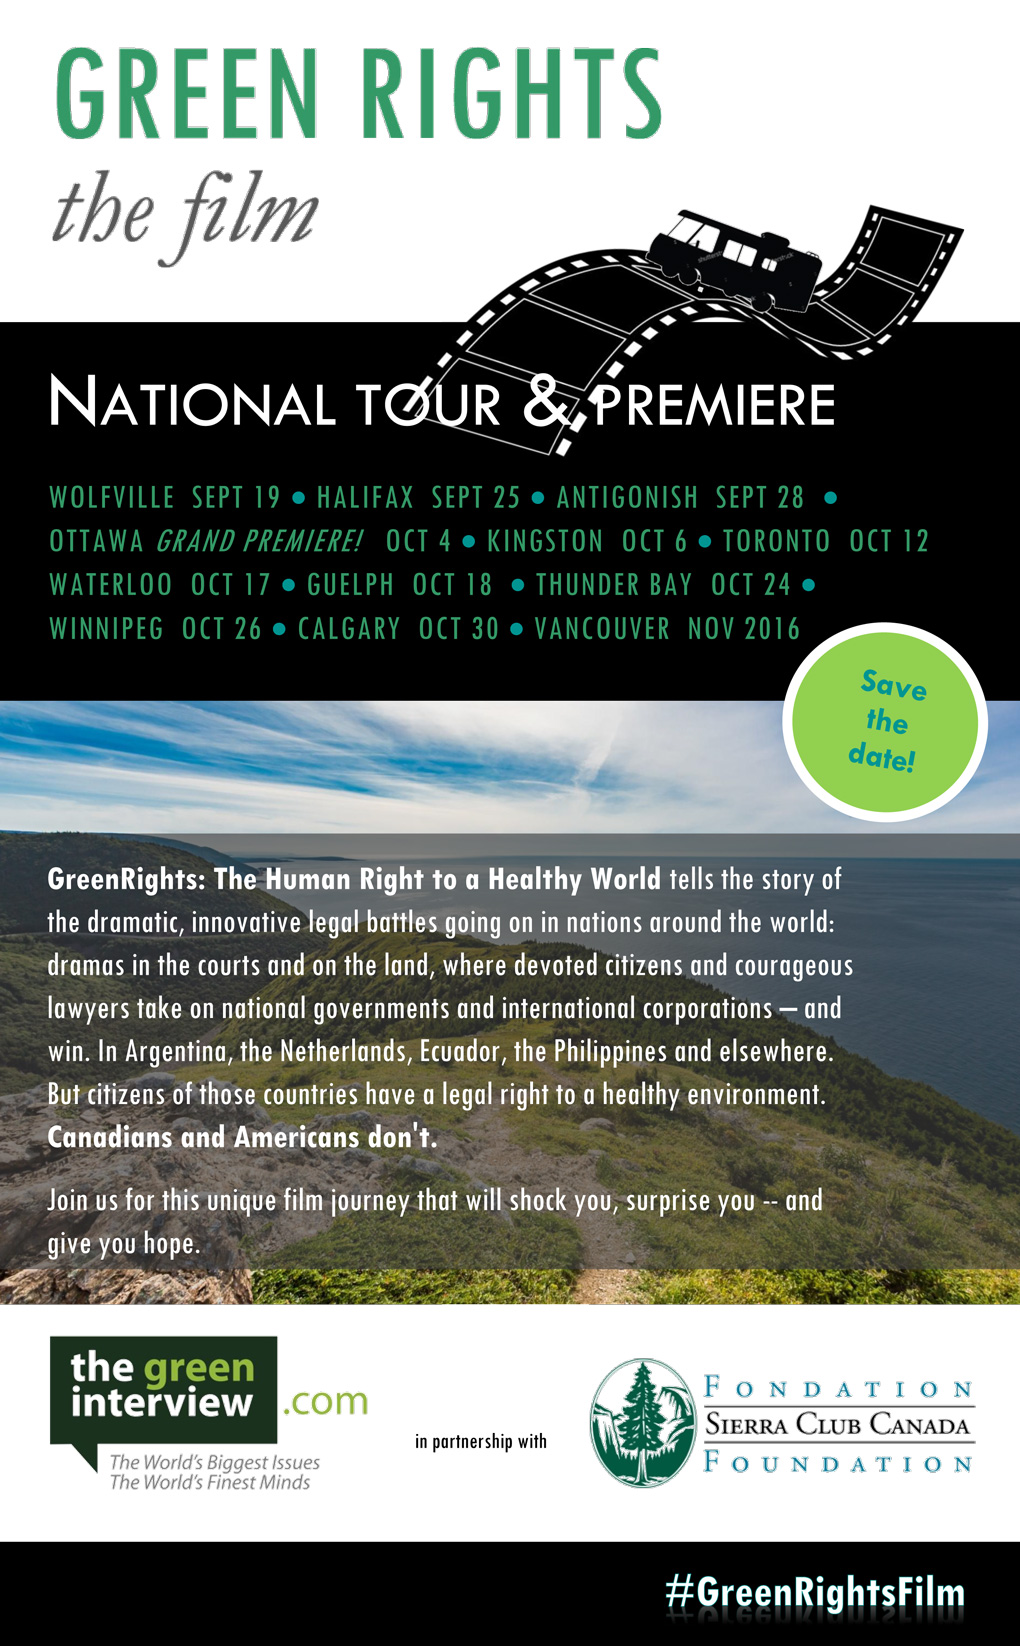 Green Rights film tour poster